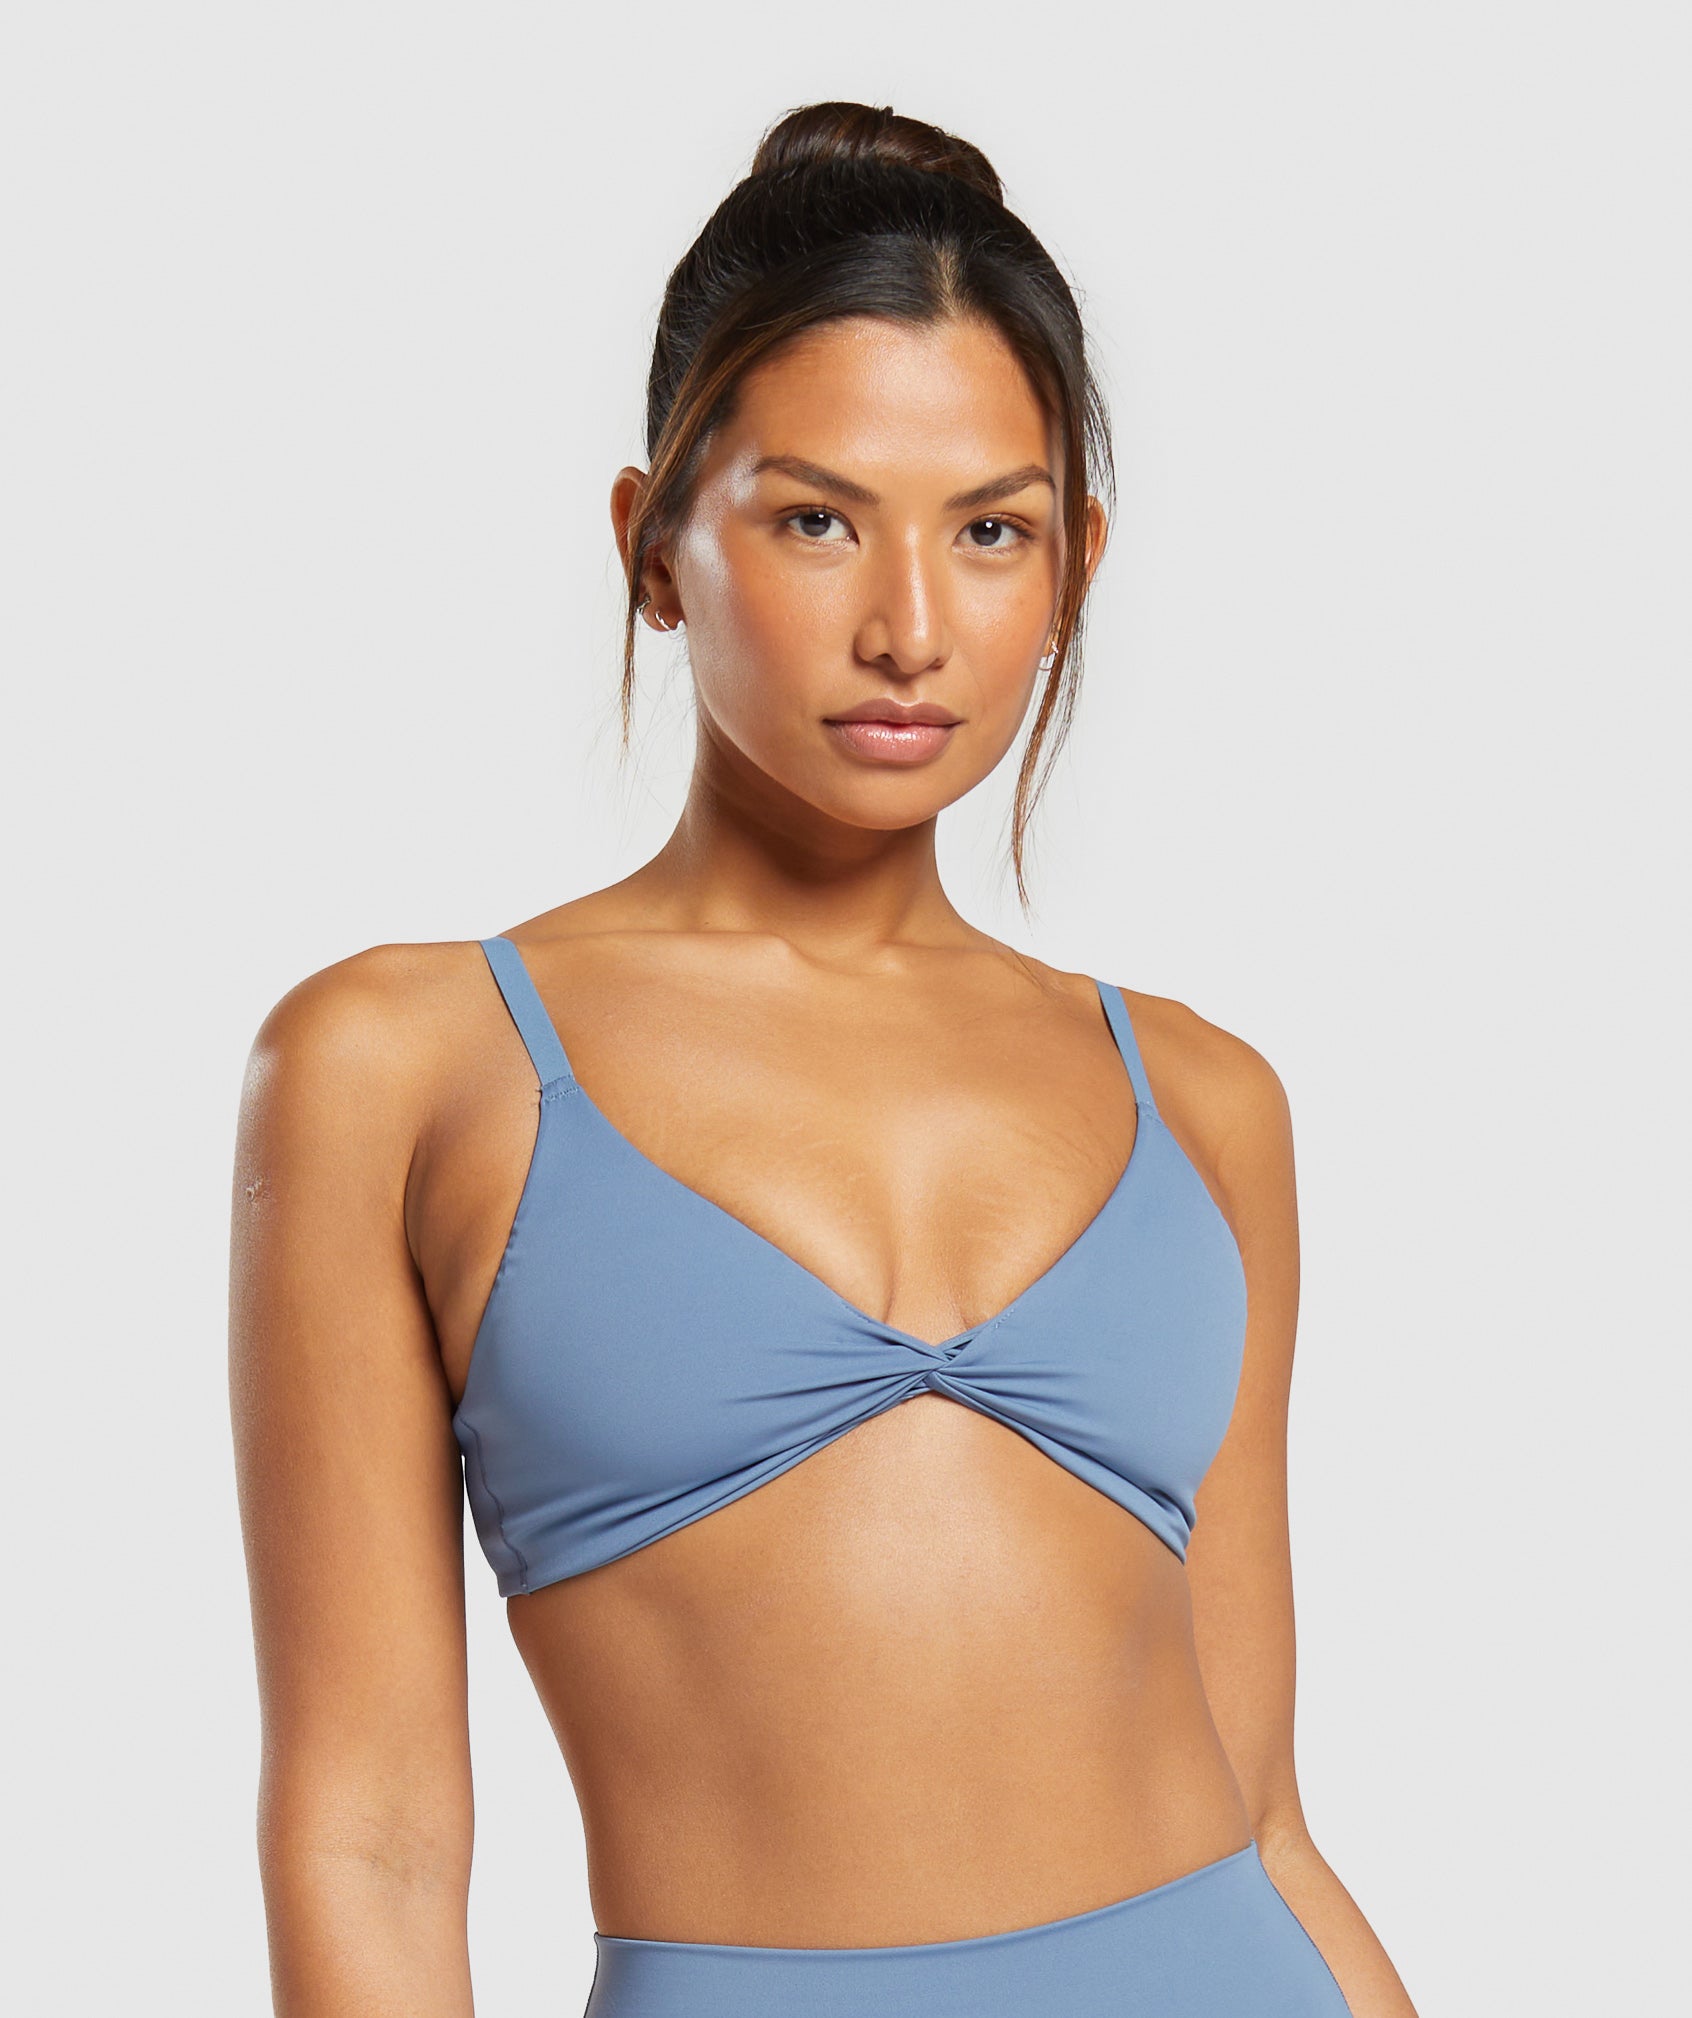 Elevate Twist Front Bralette in Faded Blue is out of stock